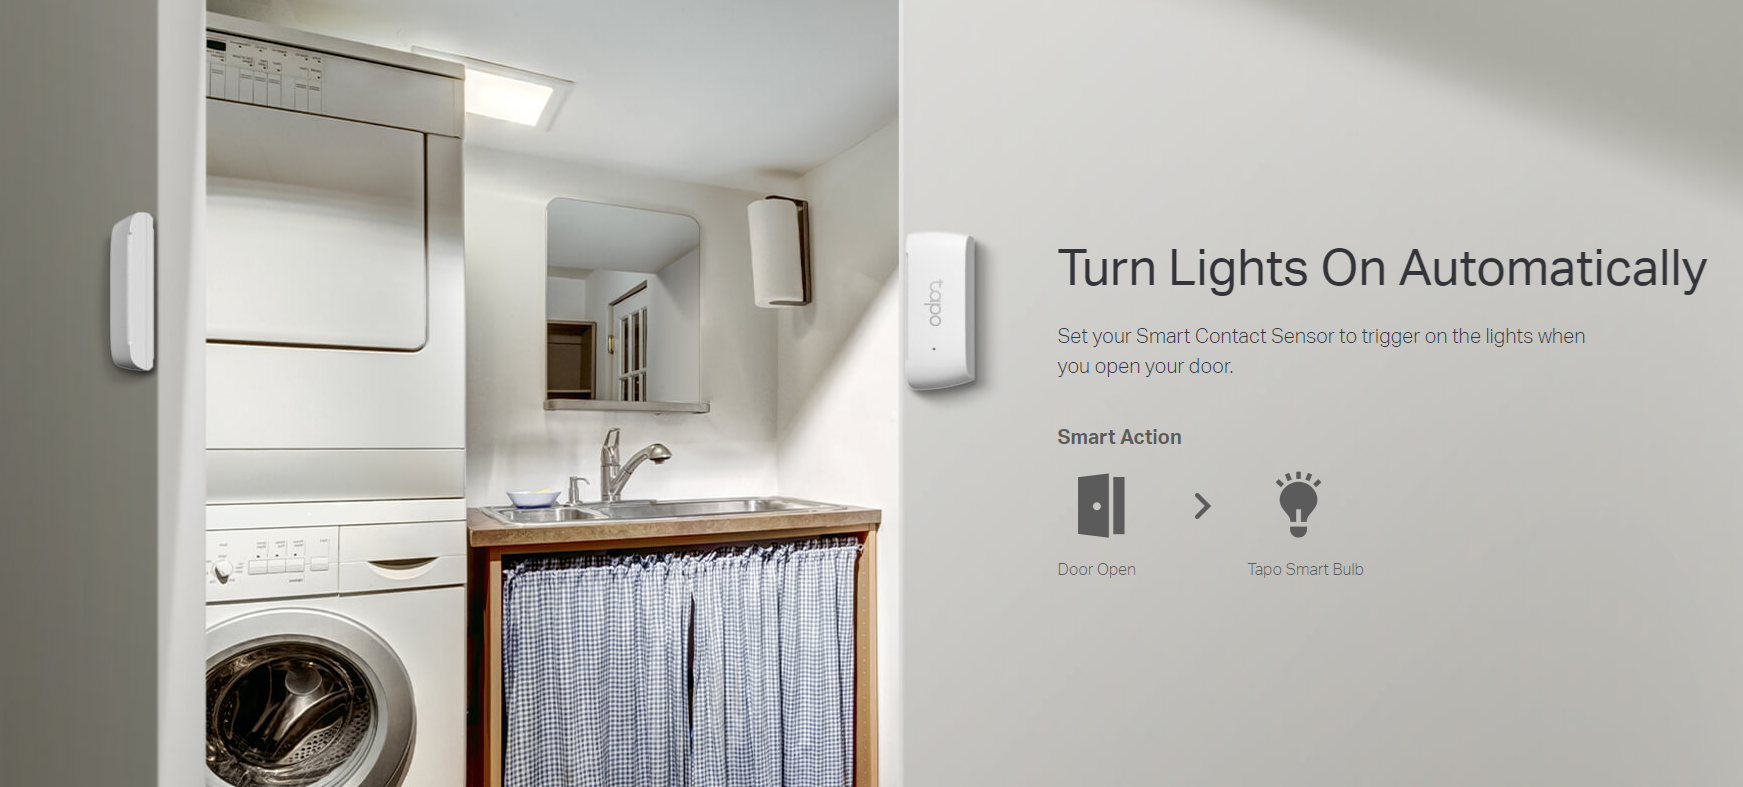 Turn Lights On Automatically
Set your Smart Contact Sensor to trigger on the lights when you open your door.